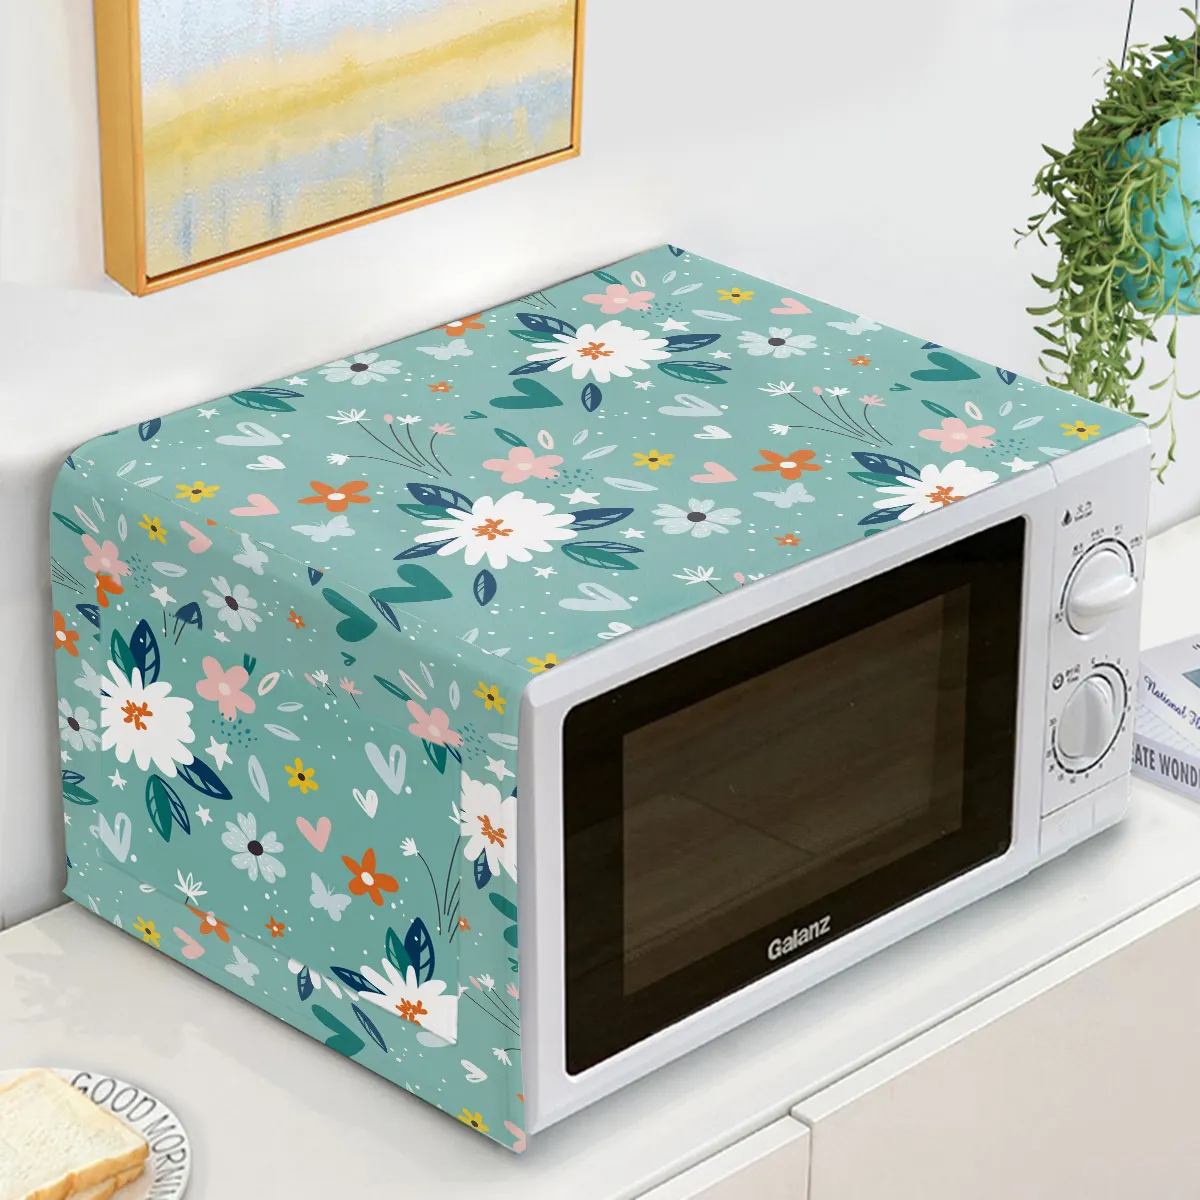 Modern Design Hot Sell High Quality Waterproof Microwave Oven Dust Cover Oil-proof Cover